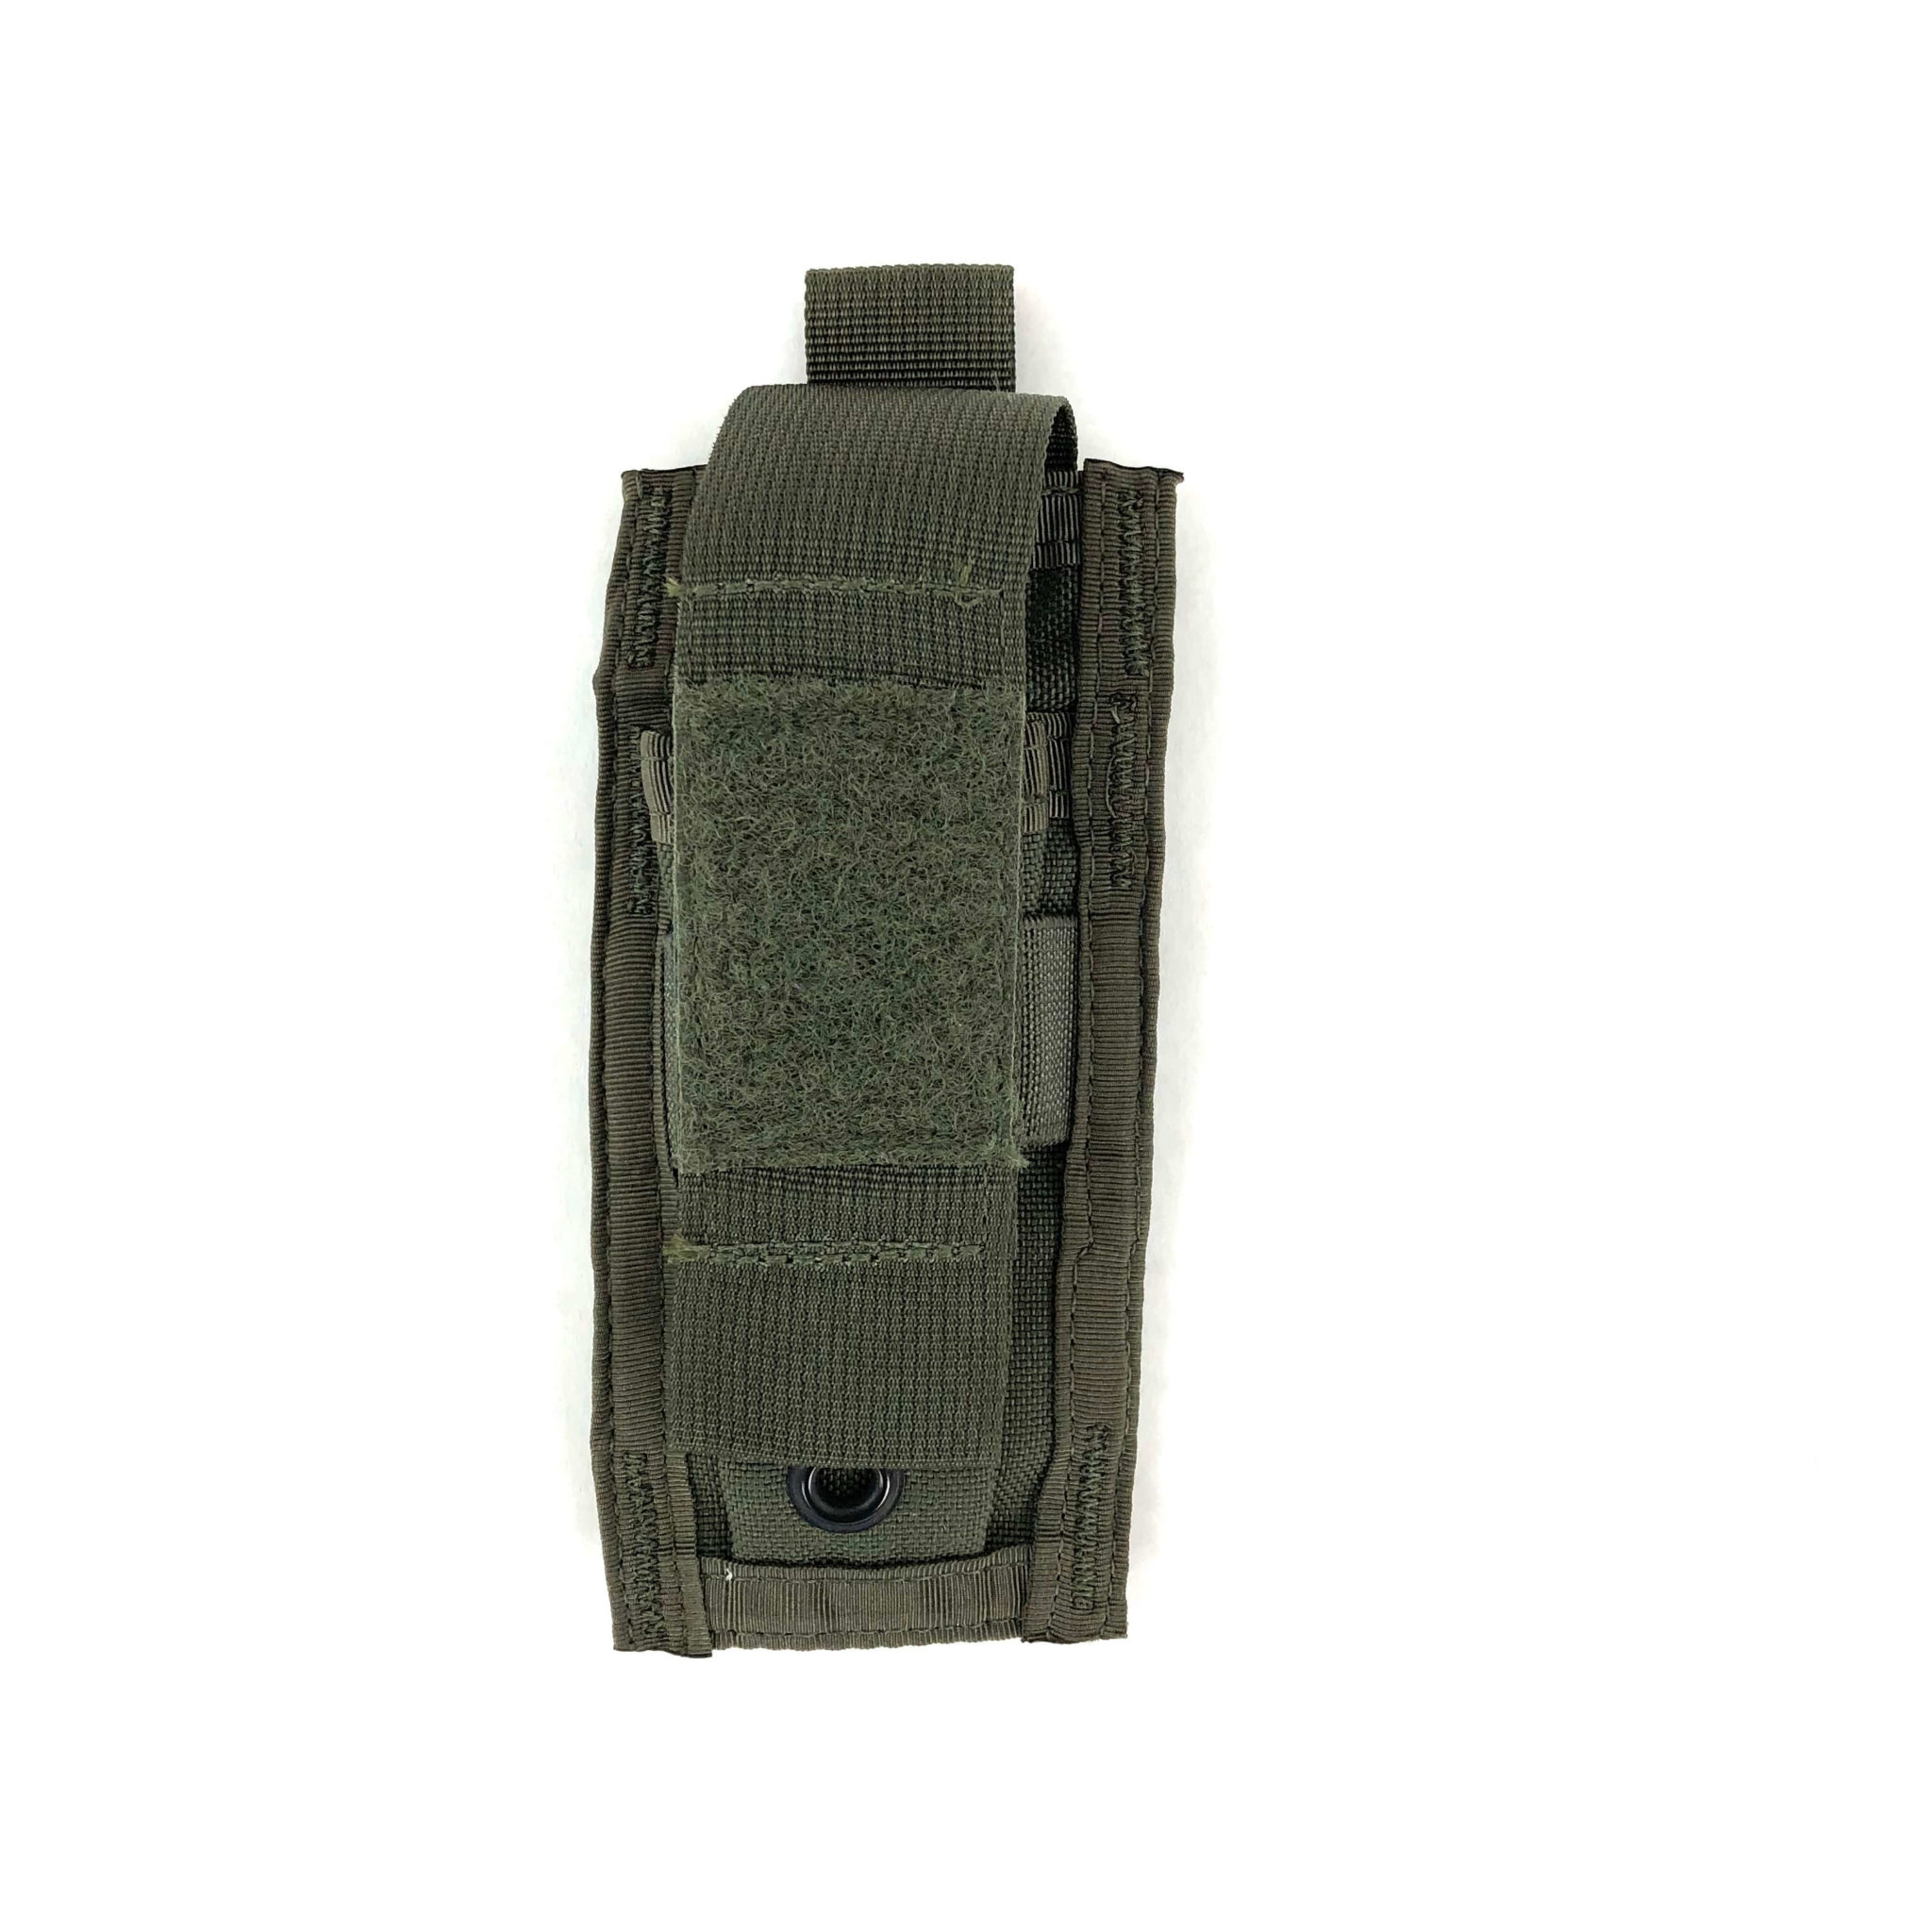 Paraclete Smoke Green Single Pistol Magazine Pouch - FAST Delivery